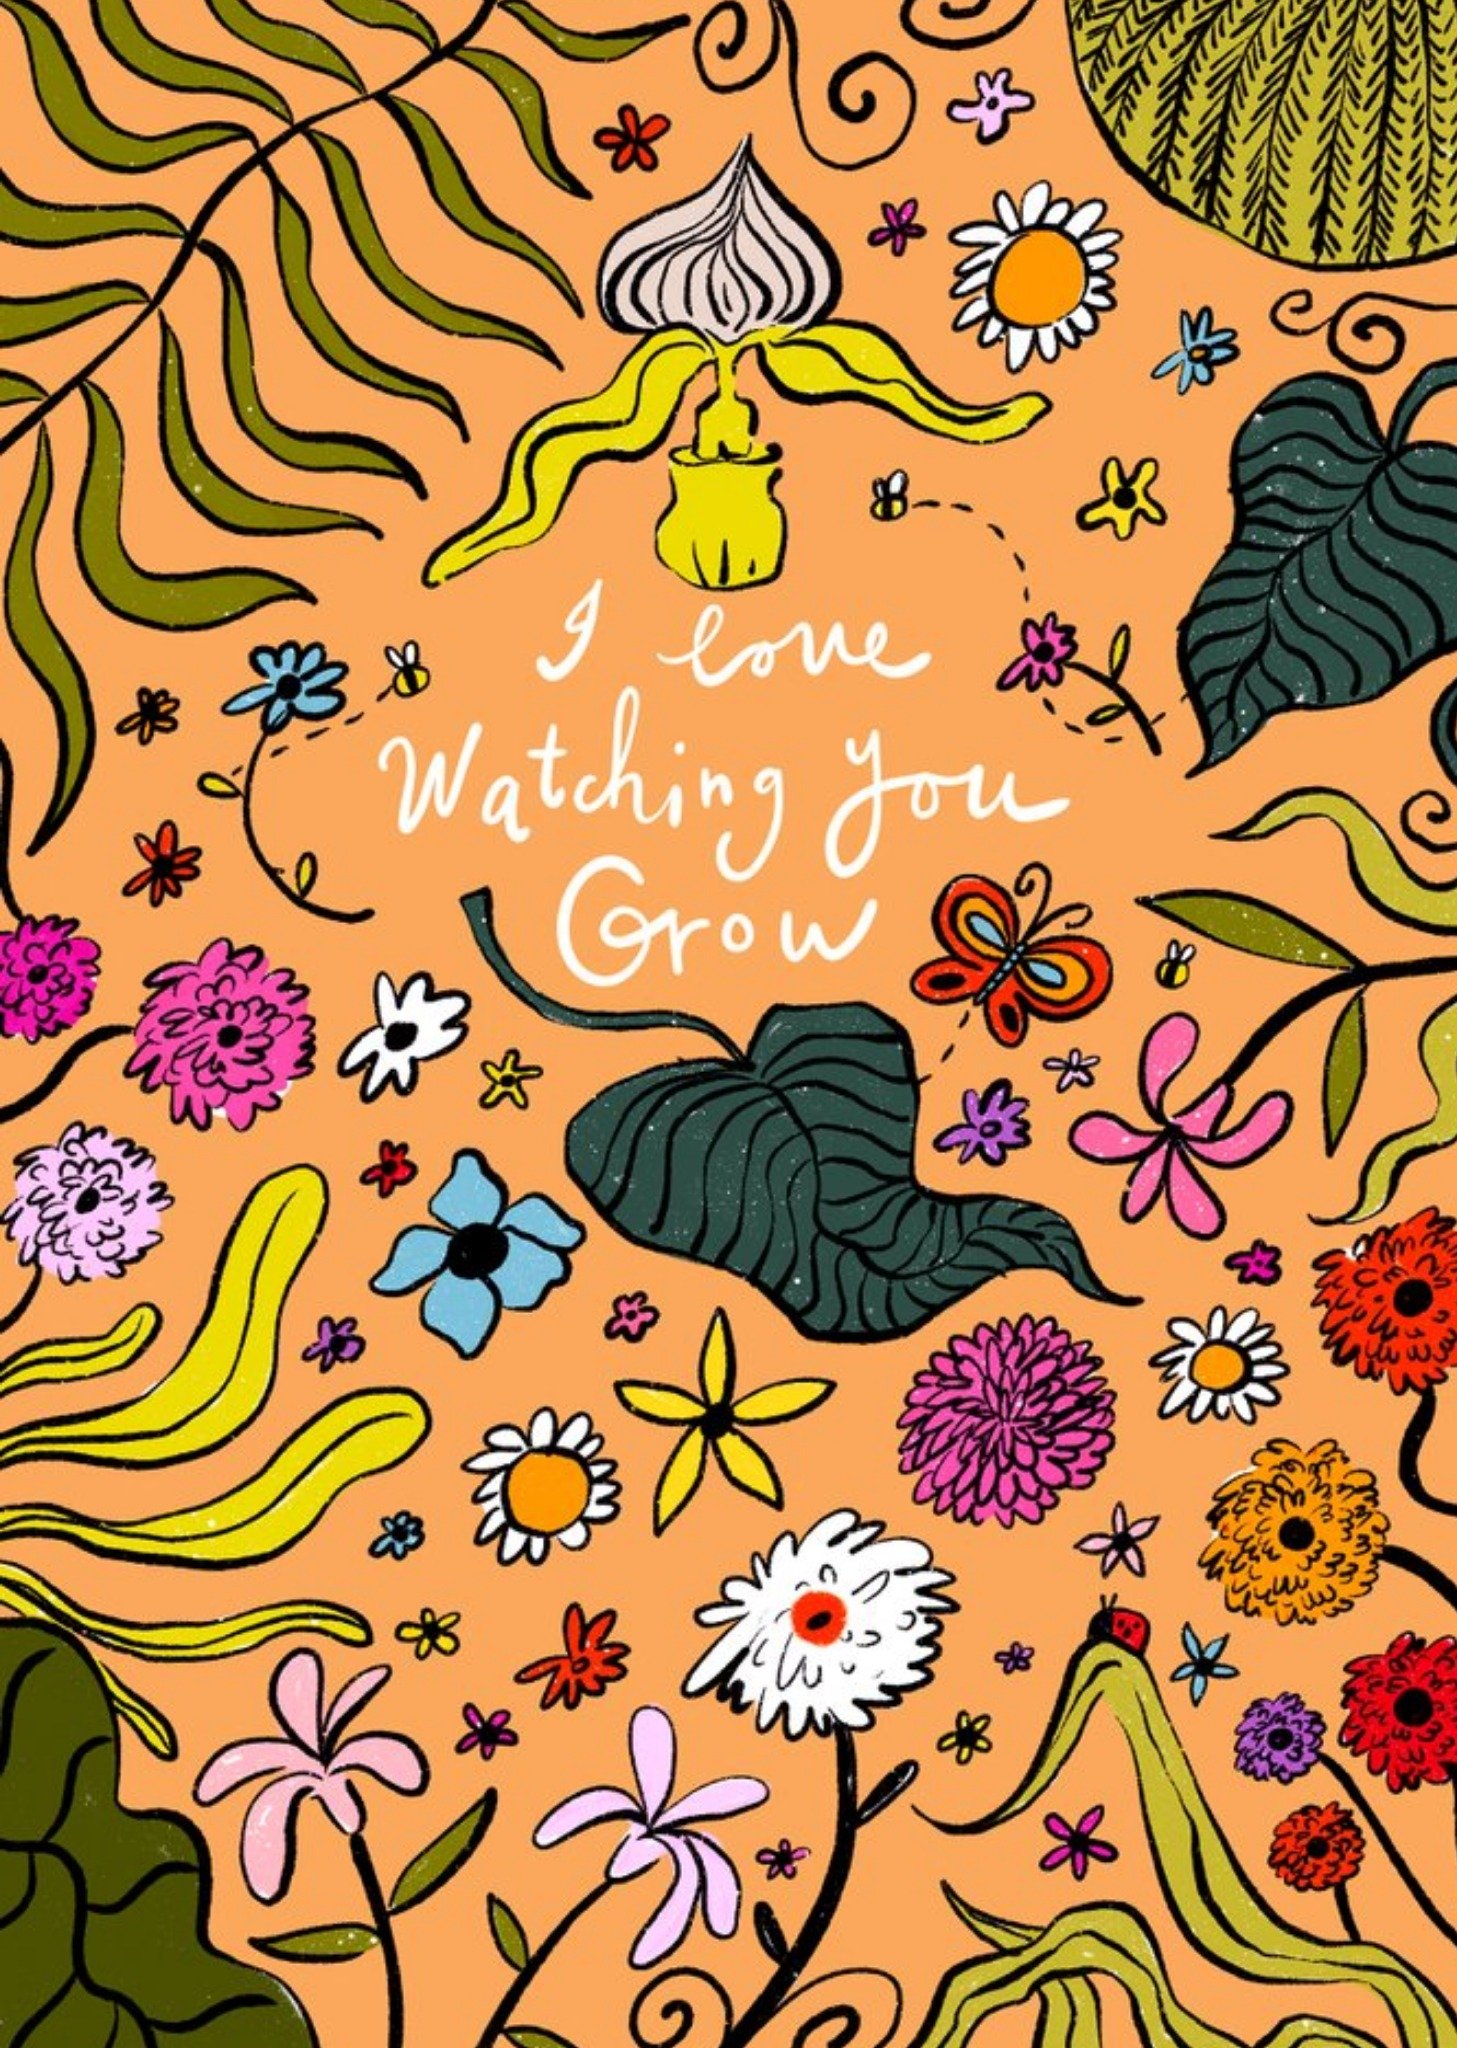 Moonpig Illustrated Floral I Love Watching You Grow Just To Say Card Ecard